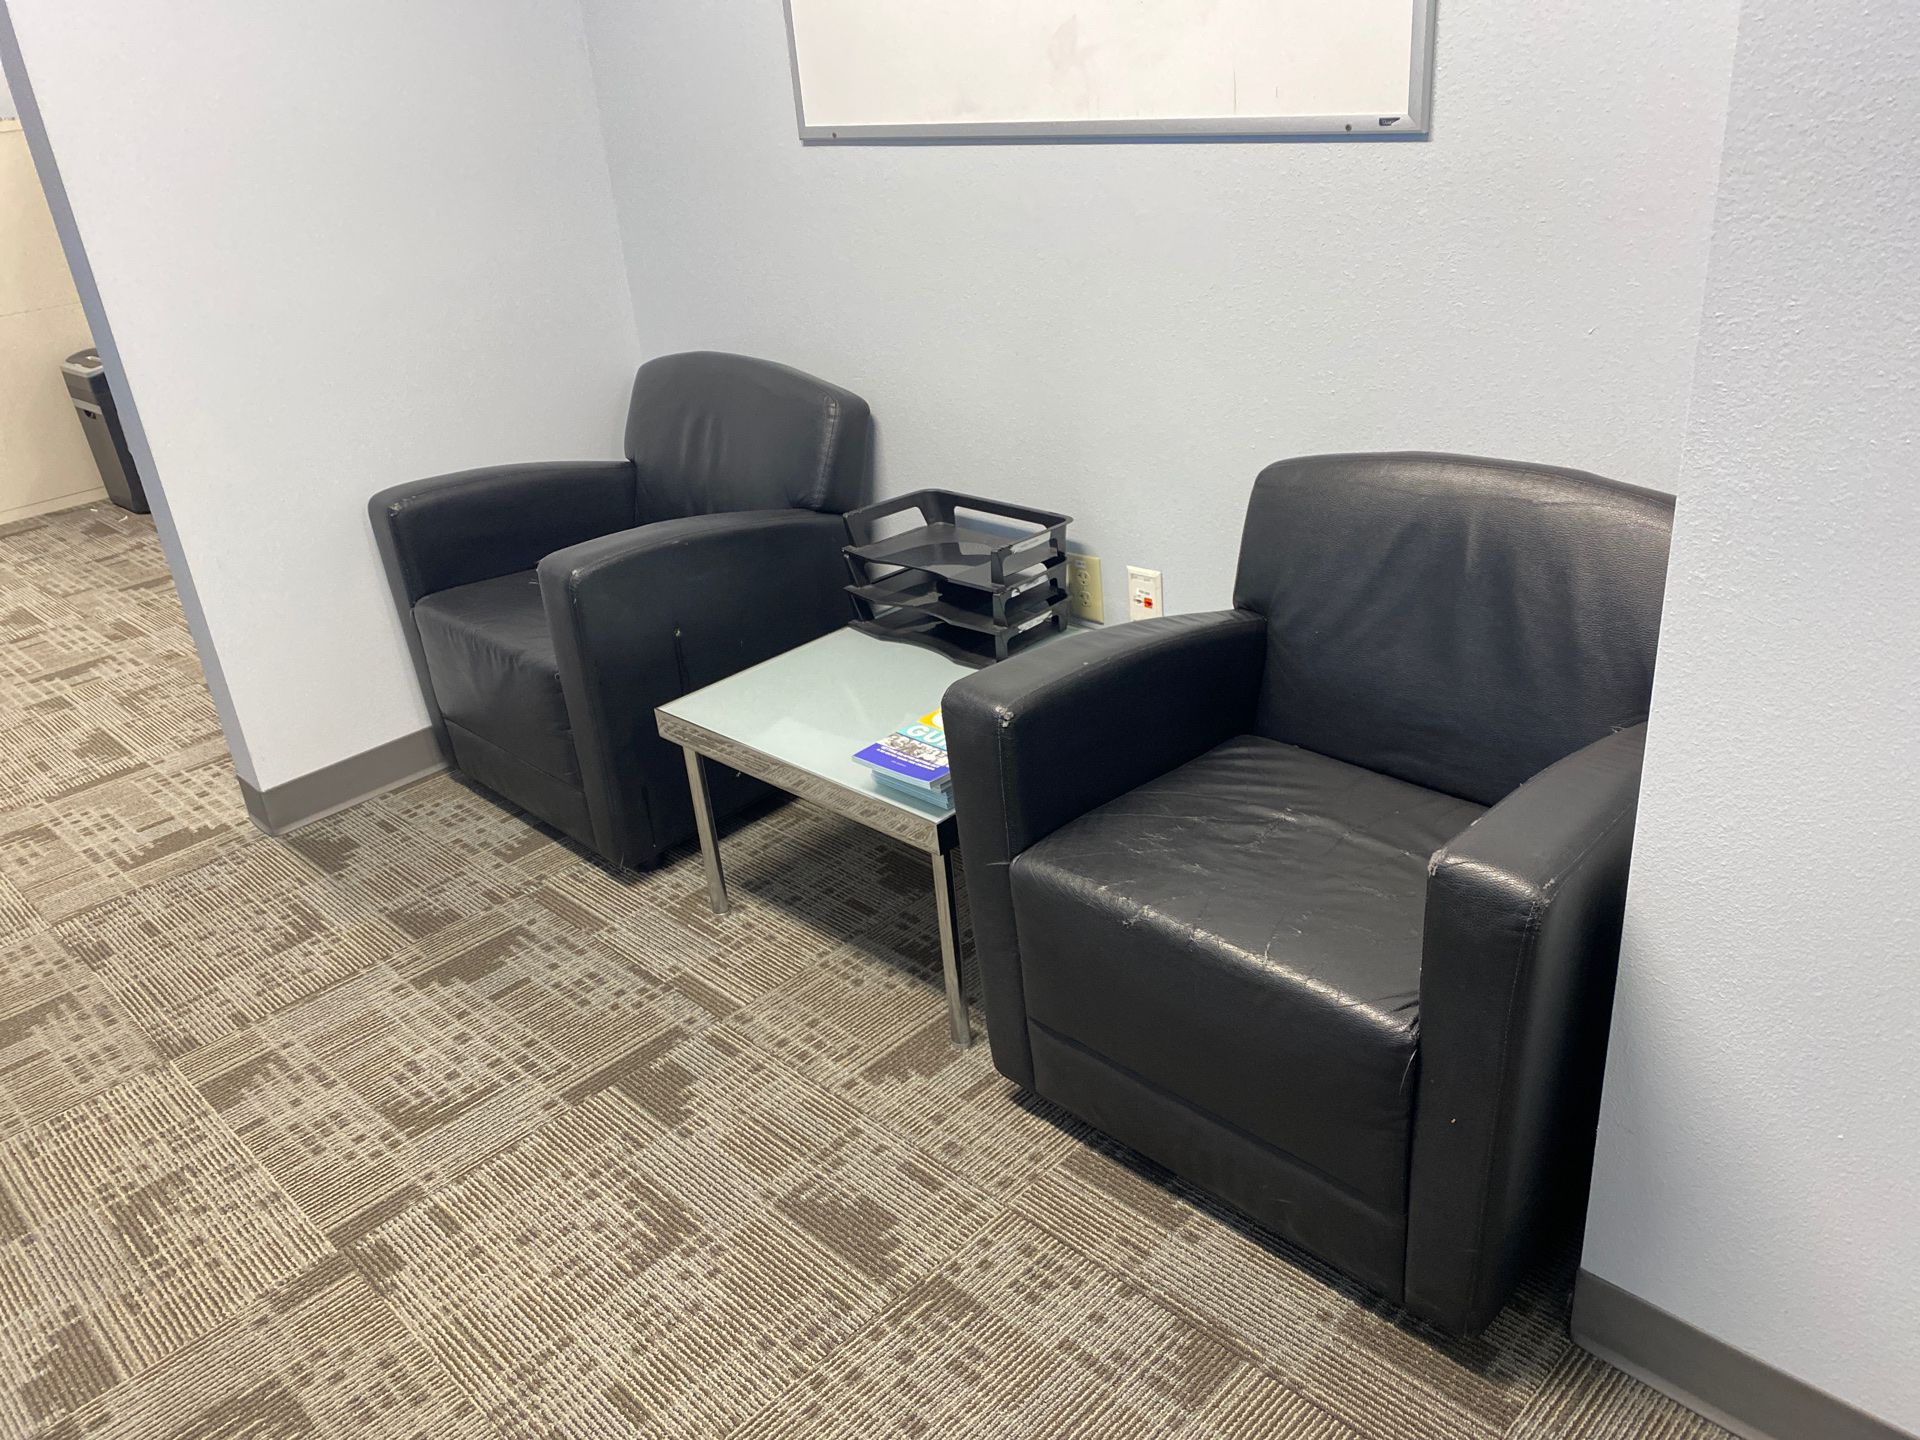 2 office chairs and end table